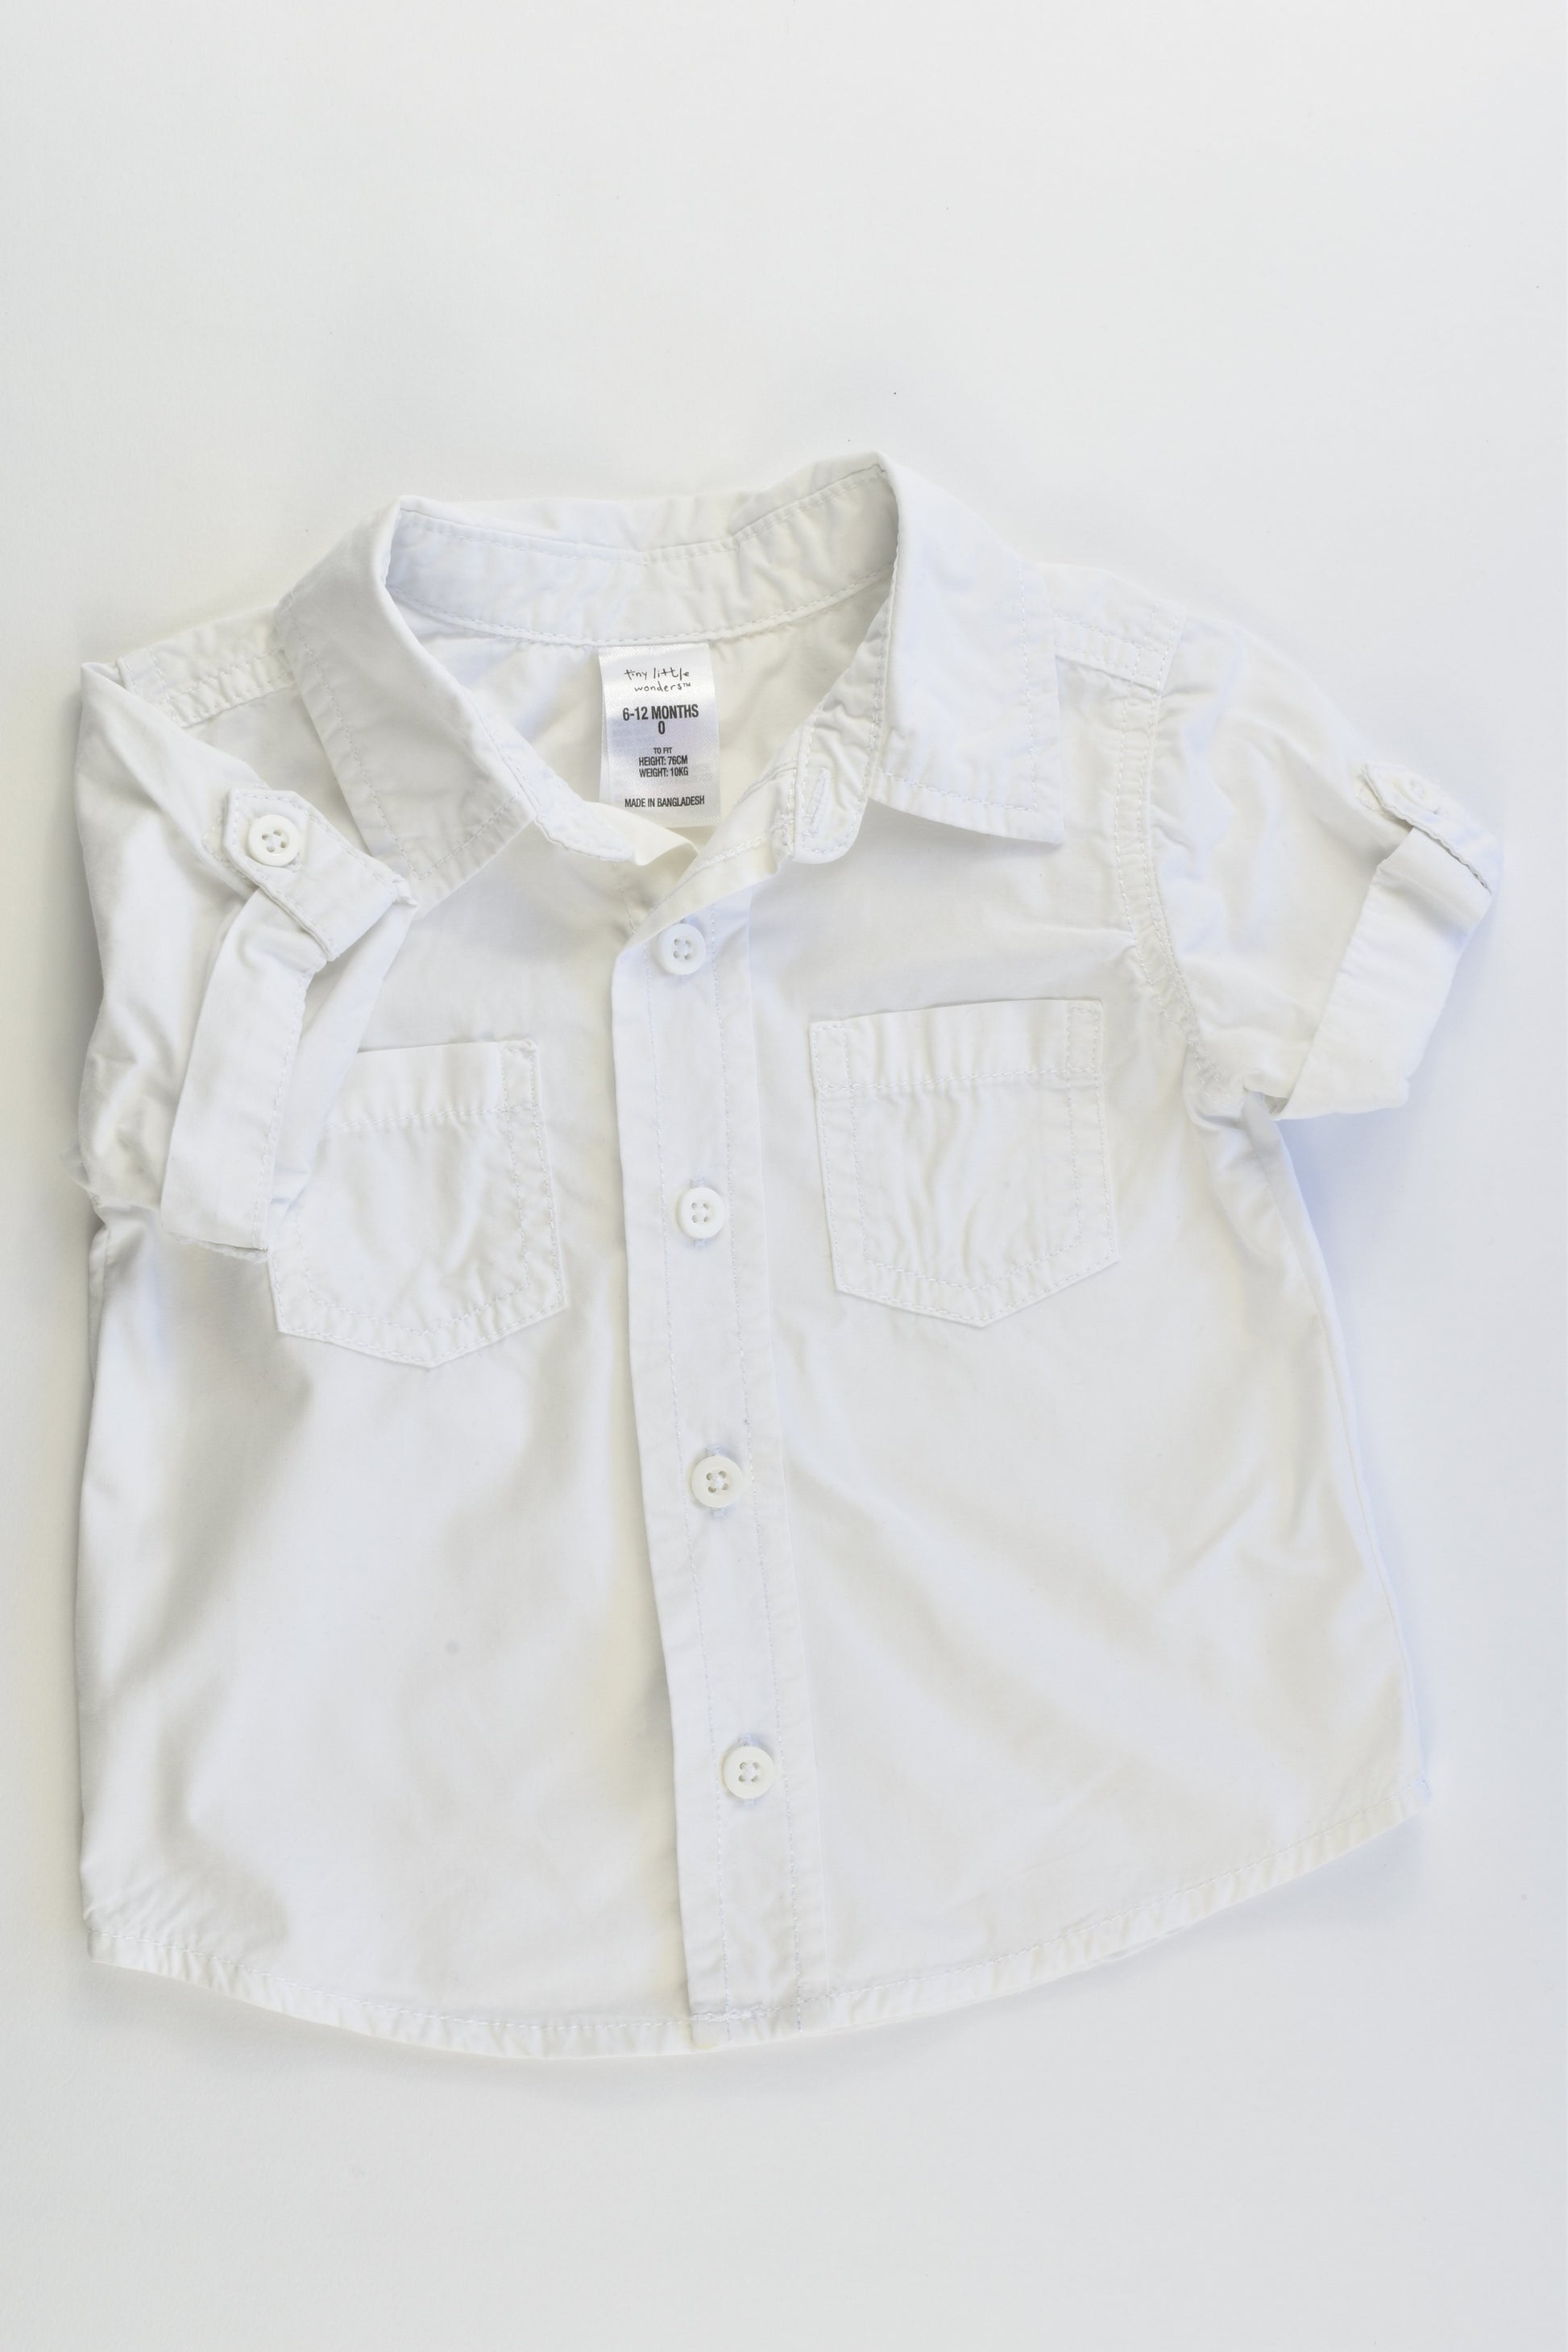 Tiny Little Wonders Size 0 (6-12 months) White Collared Shirt